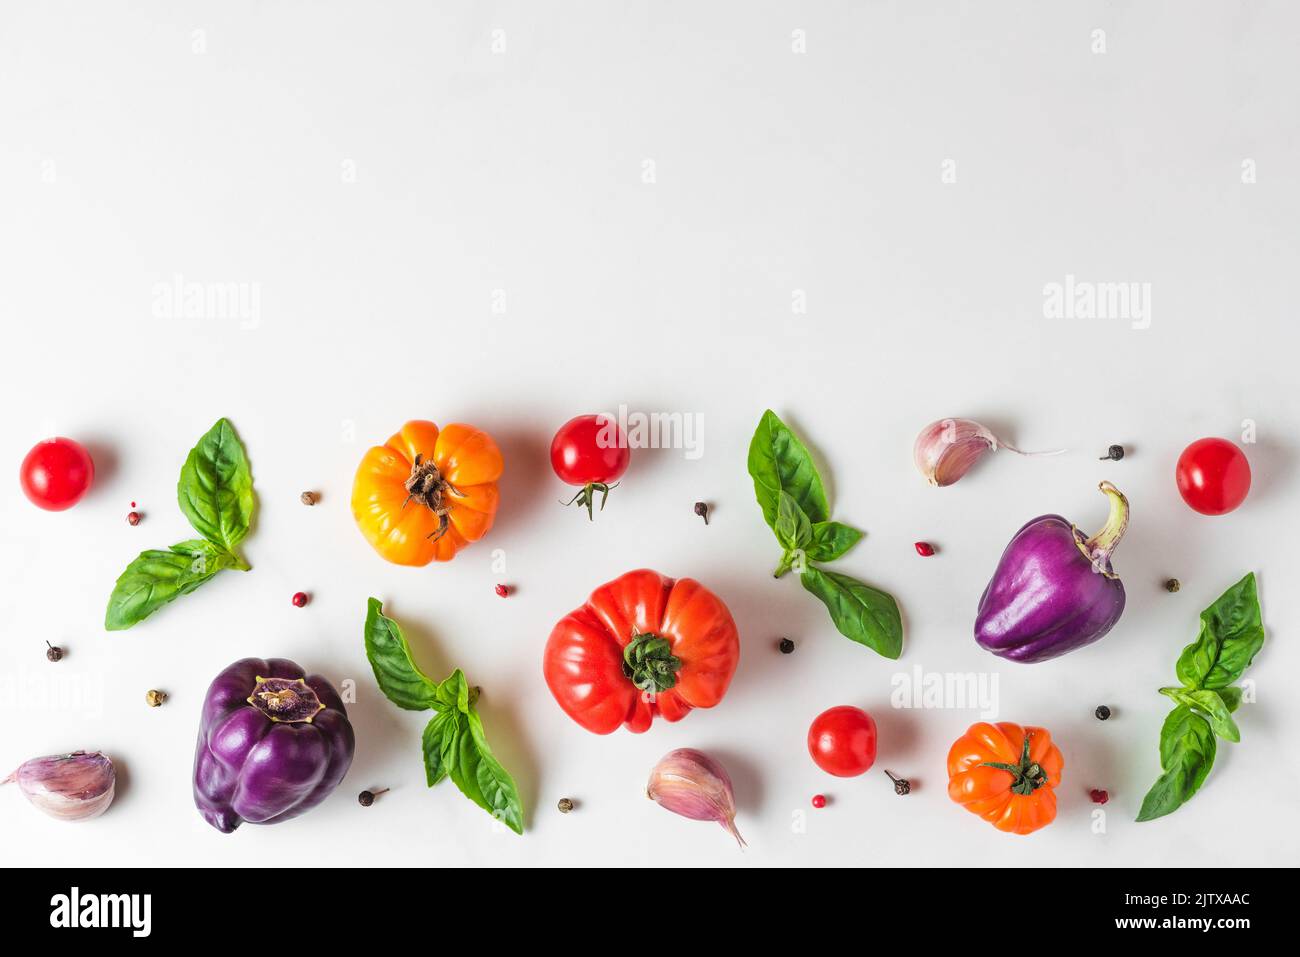 Creative layout made of tomatoes, pepper, garlic, basil. Flat lay. Top view. Food composition. Vegetables isolated on white background. Food ingredien Stock Photo